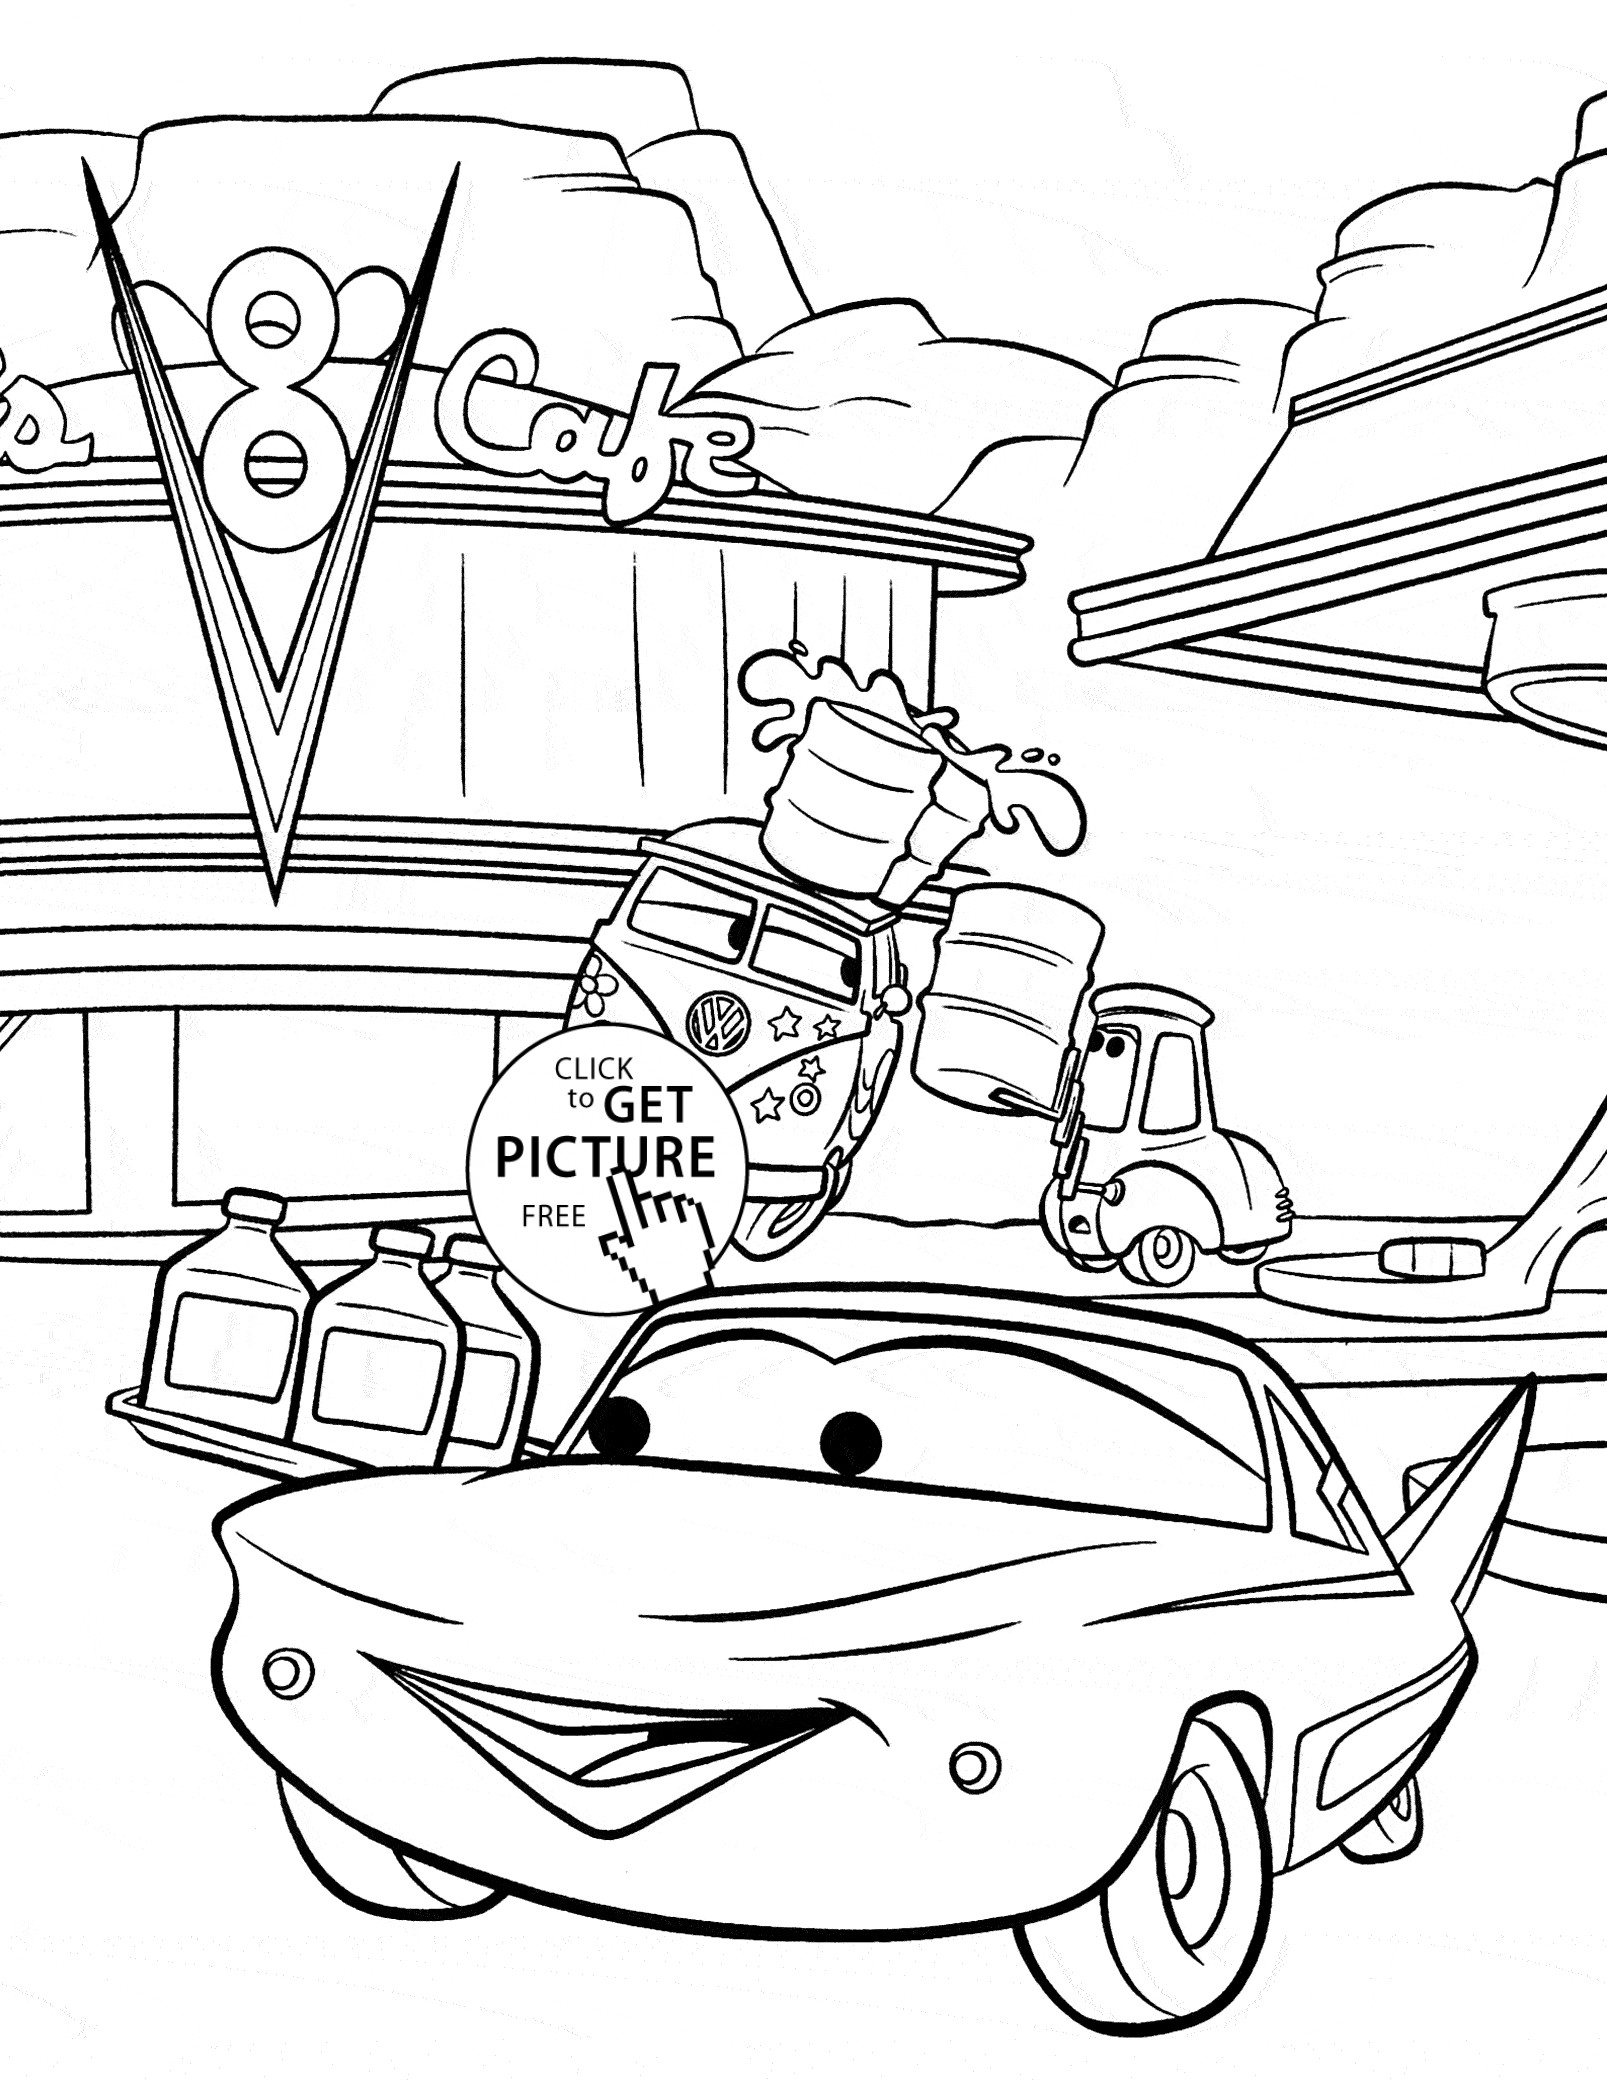 Coloring Sheets For Boys Cars
 Cars cafe 8 coloring page for kids disney coloring pages